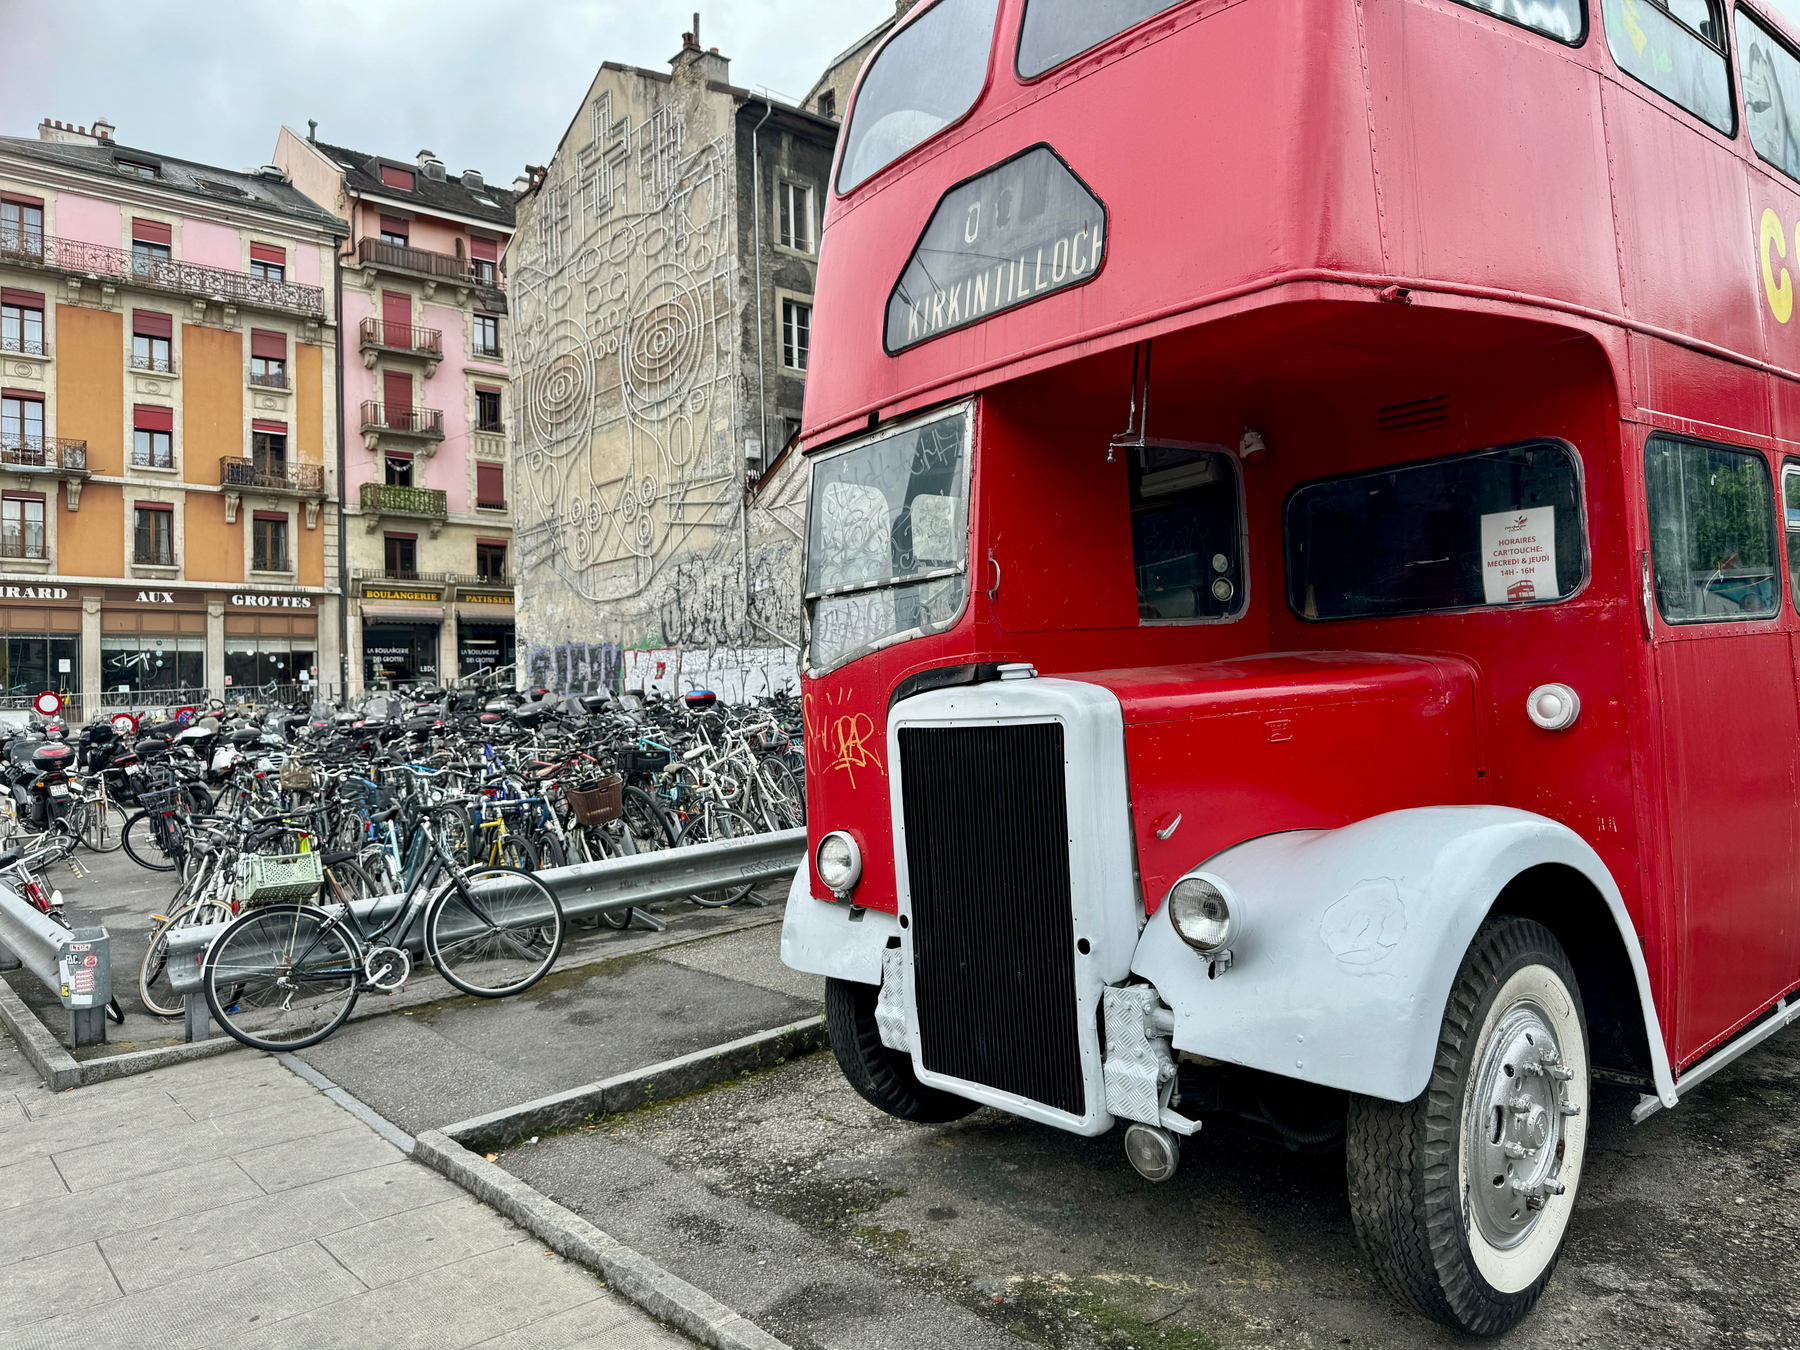 Red double-decker bus parked beside a crowded bicycle rack, with apartment buildings in the background and street art on a building wall.